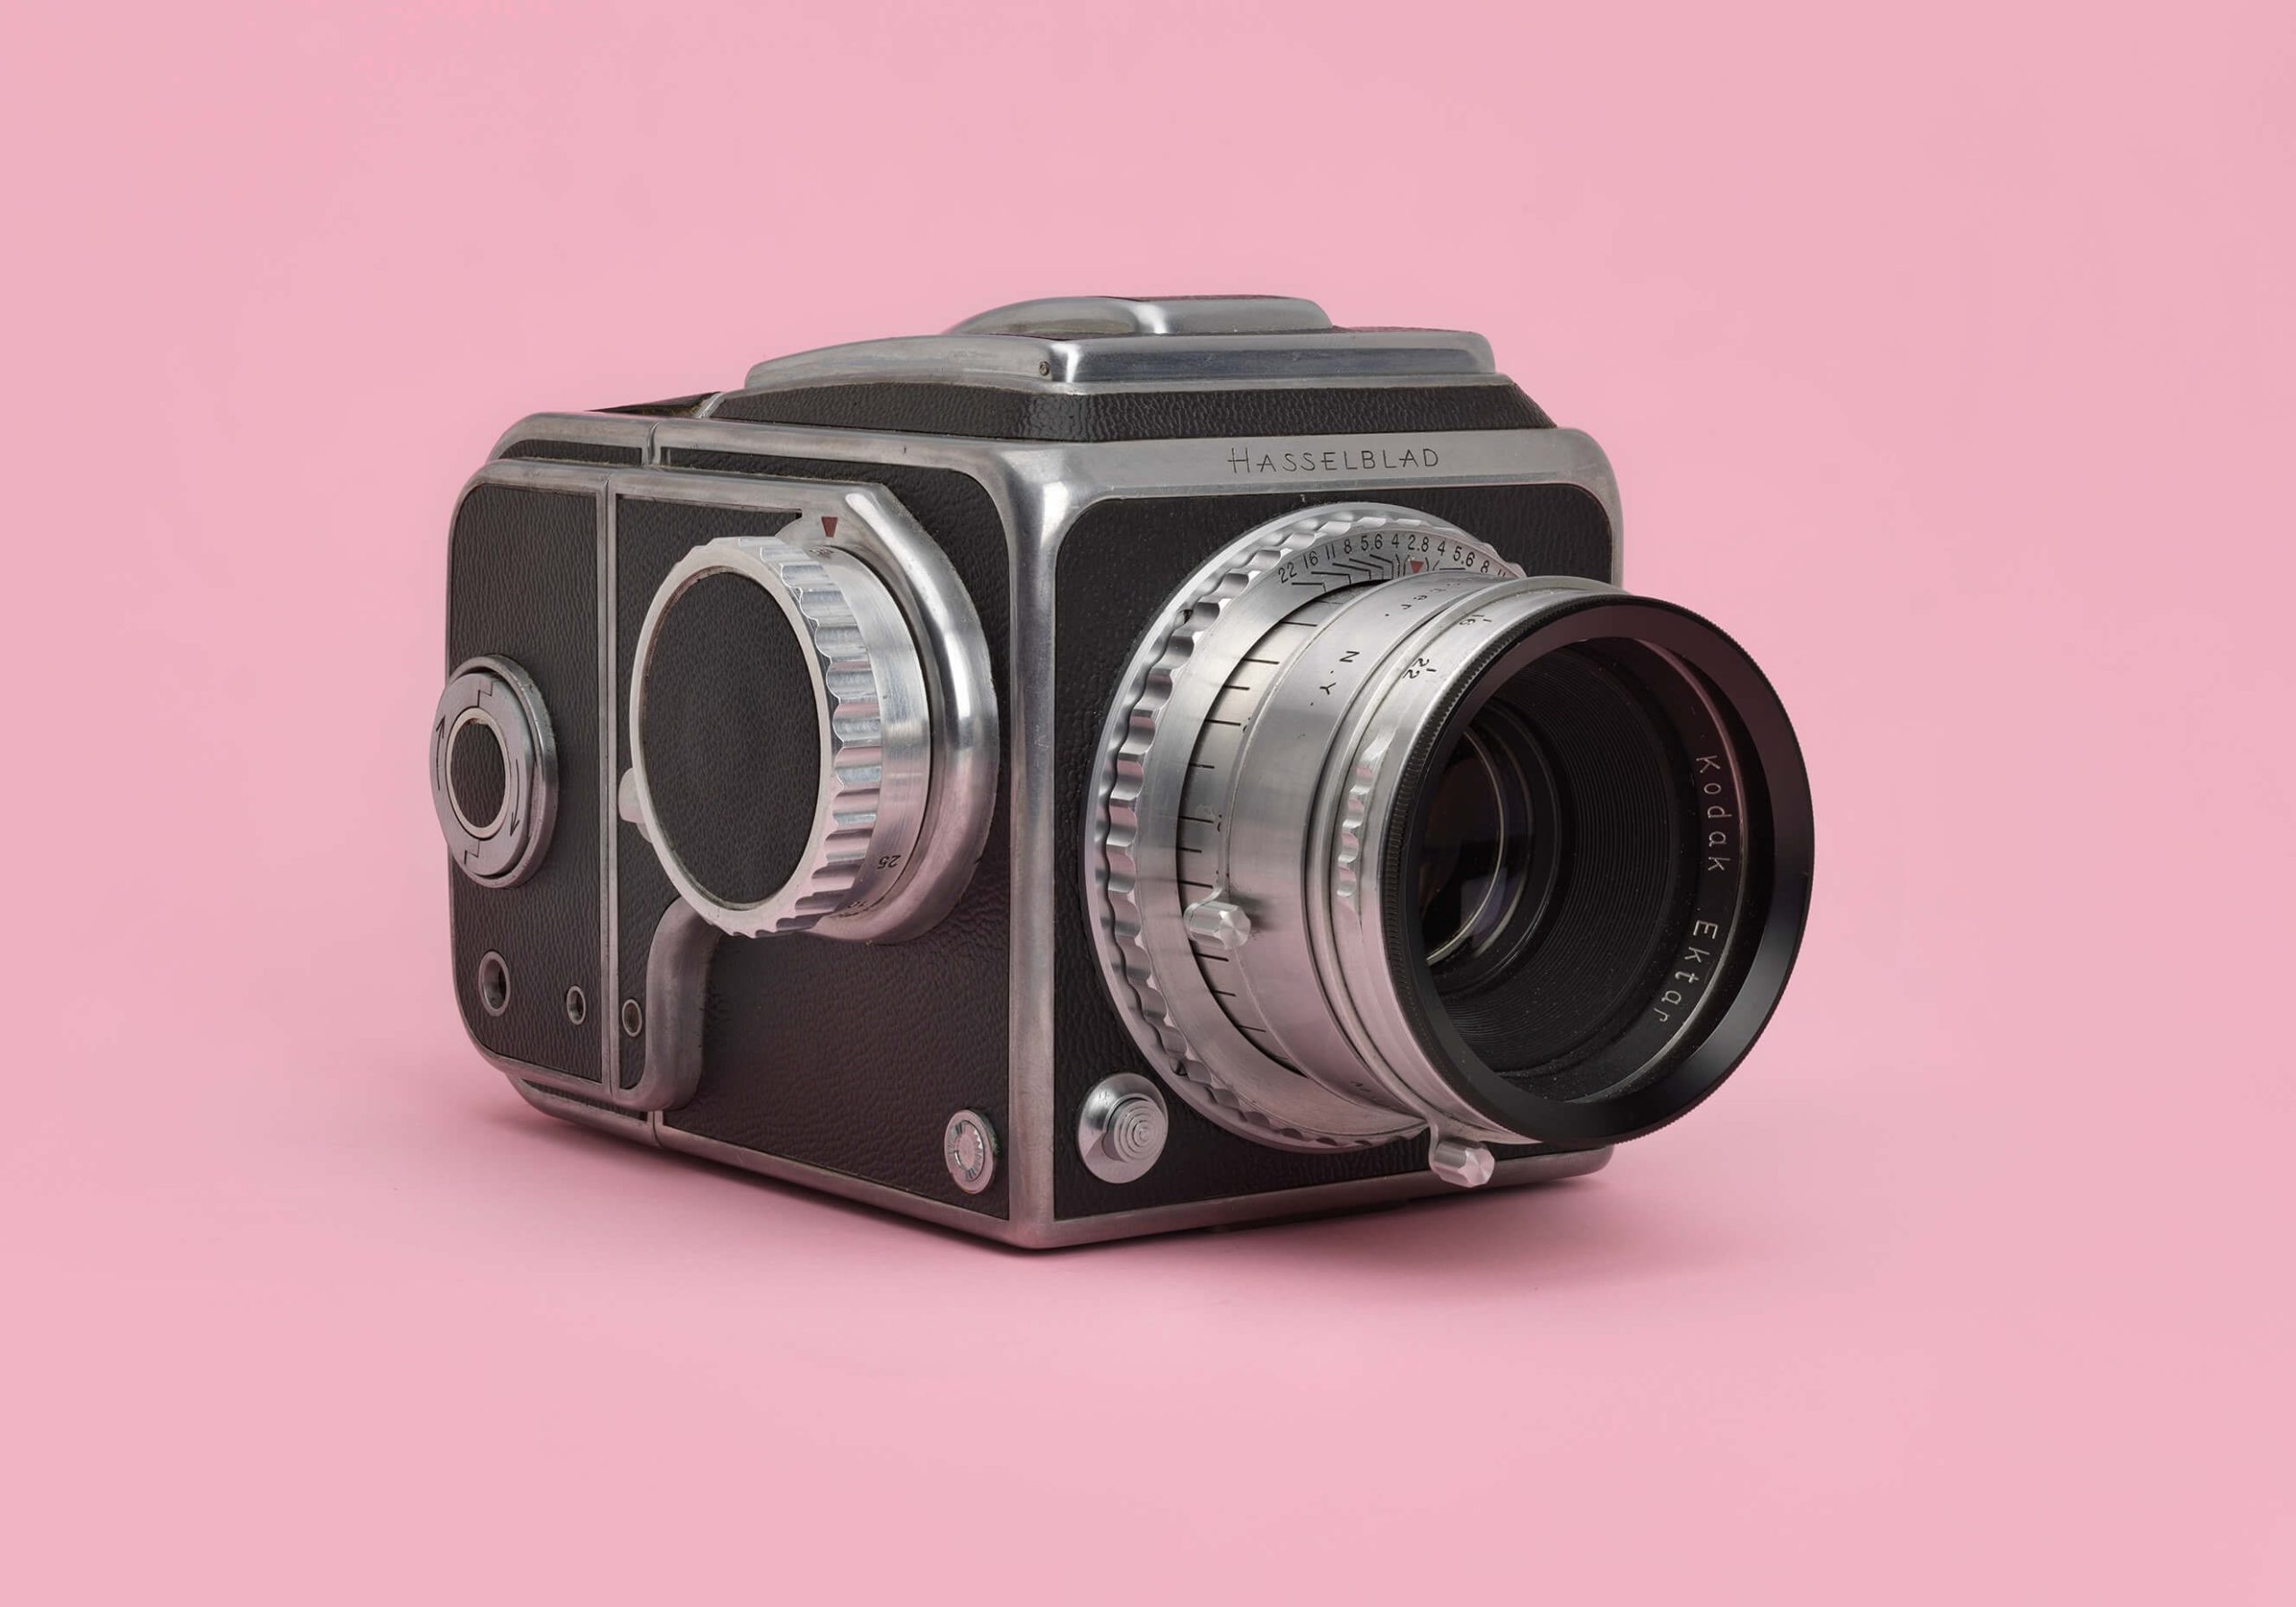 In focus: Cameras by the designers who created cars